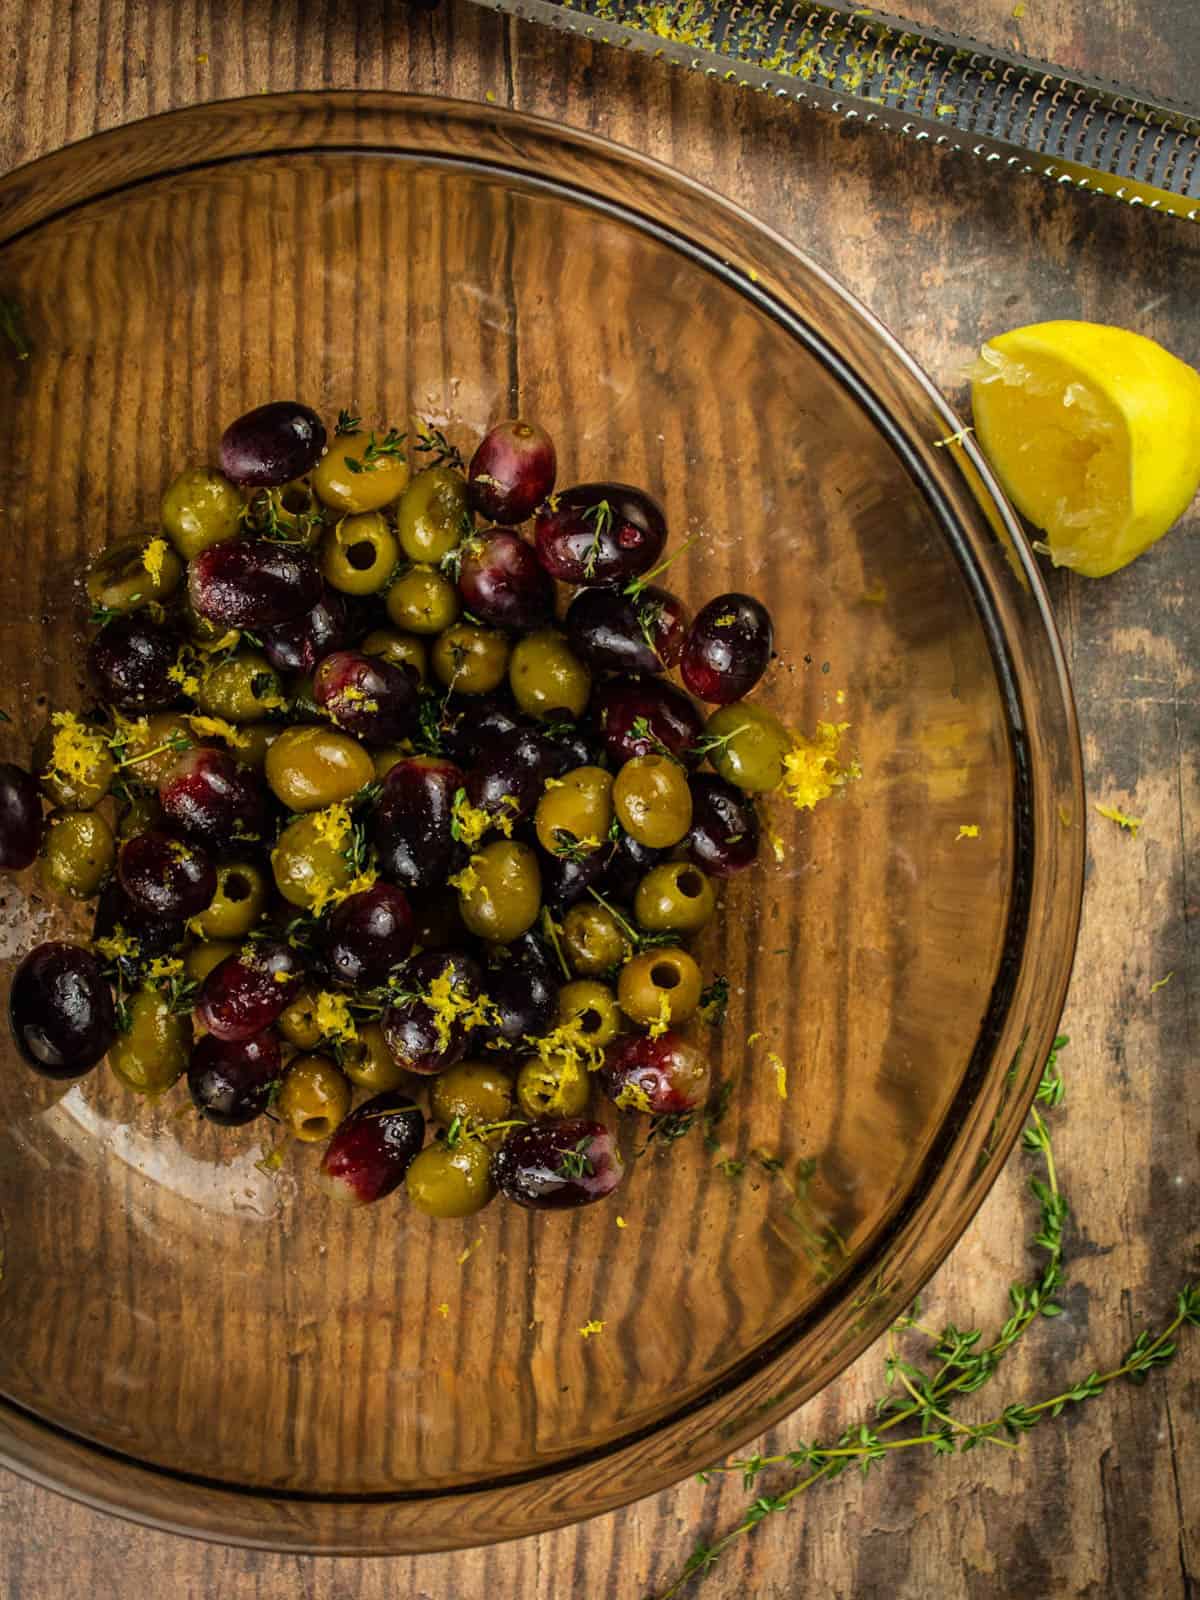 grapes, olives, lemon zest, thyme and olive oil in a bowl